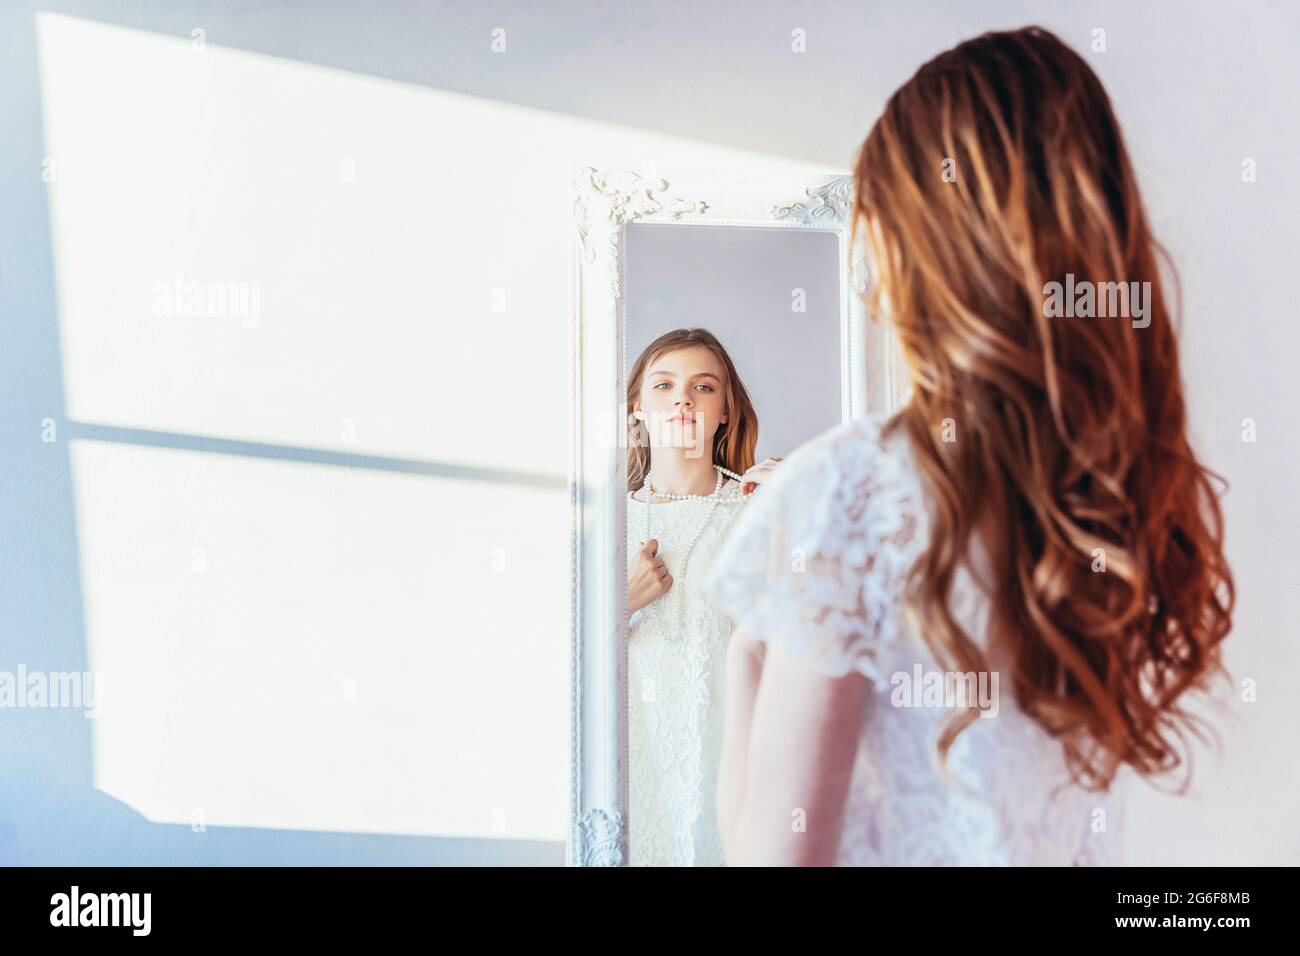 Beauty makeup morning rutine love yourself concept. Young teenage girl  looking at reflection in mirror. Young positive woman wearing white dress  Stock Photo - Alamy